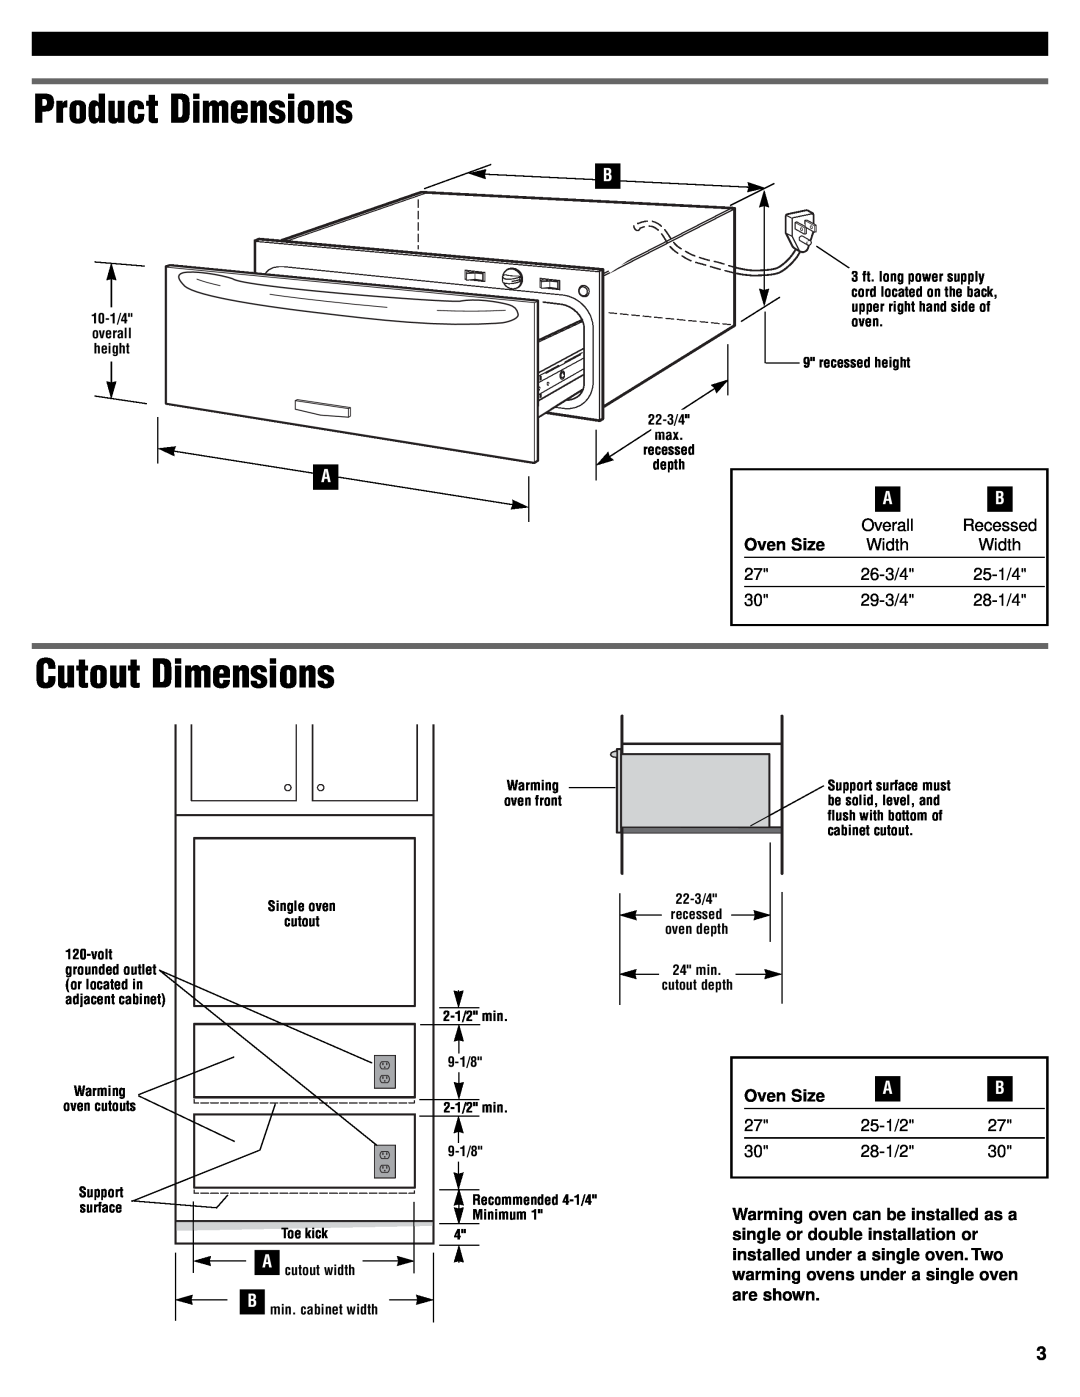 KitchenAid 4452828 installation instructions Product Dimensions, Cutout Dimensions 